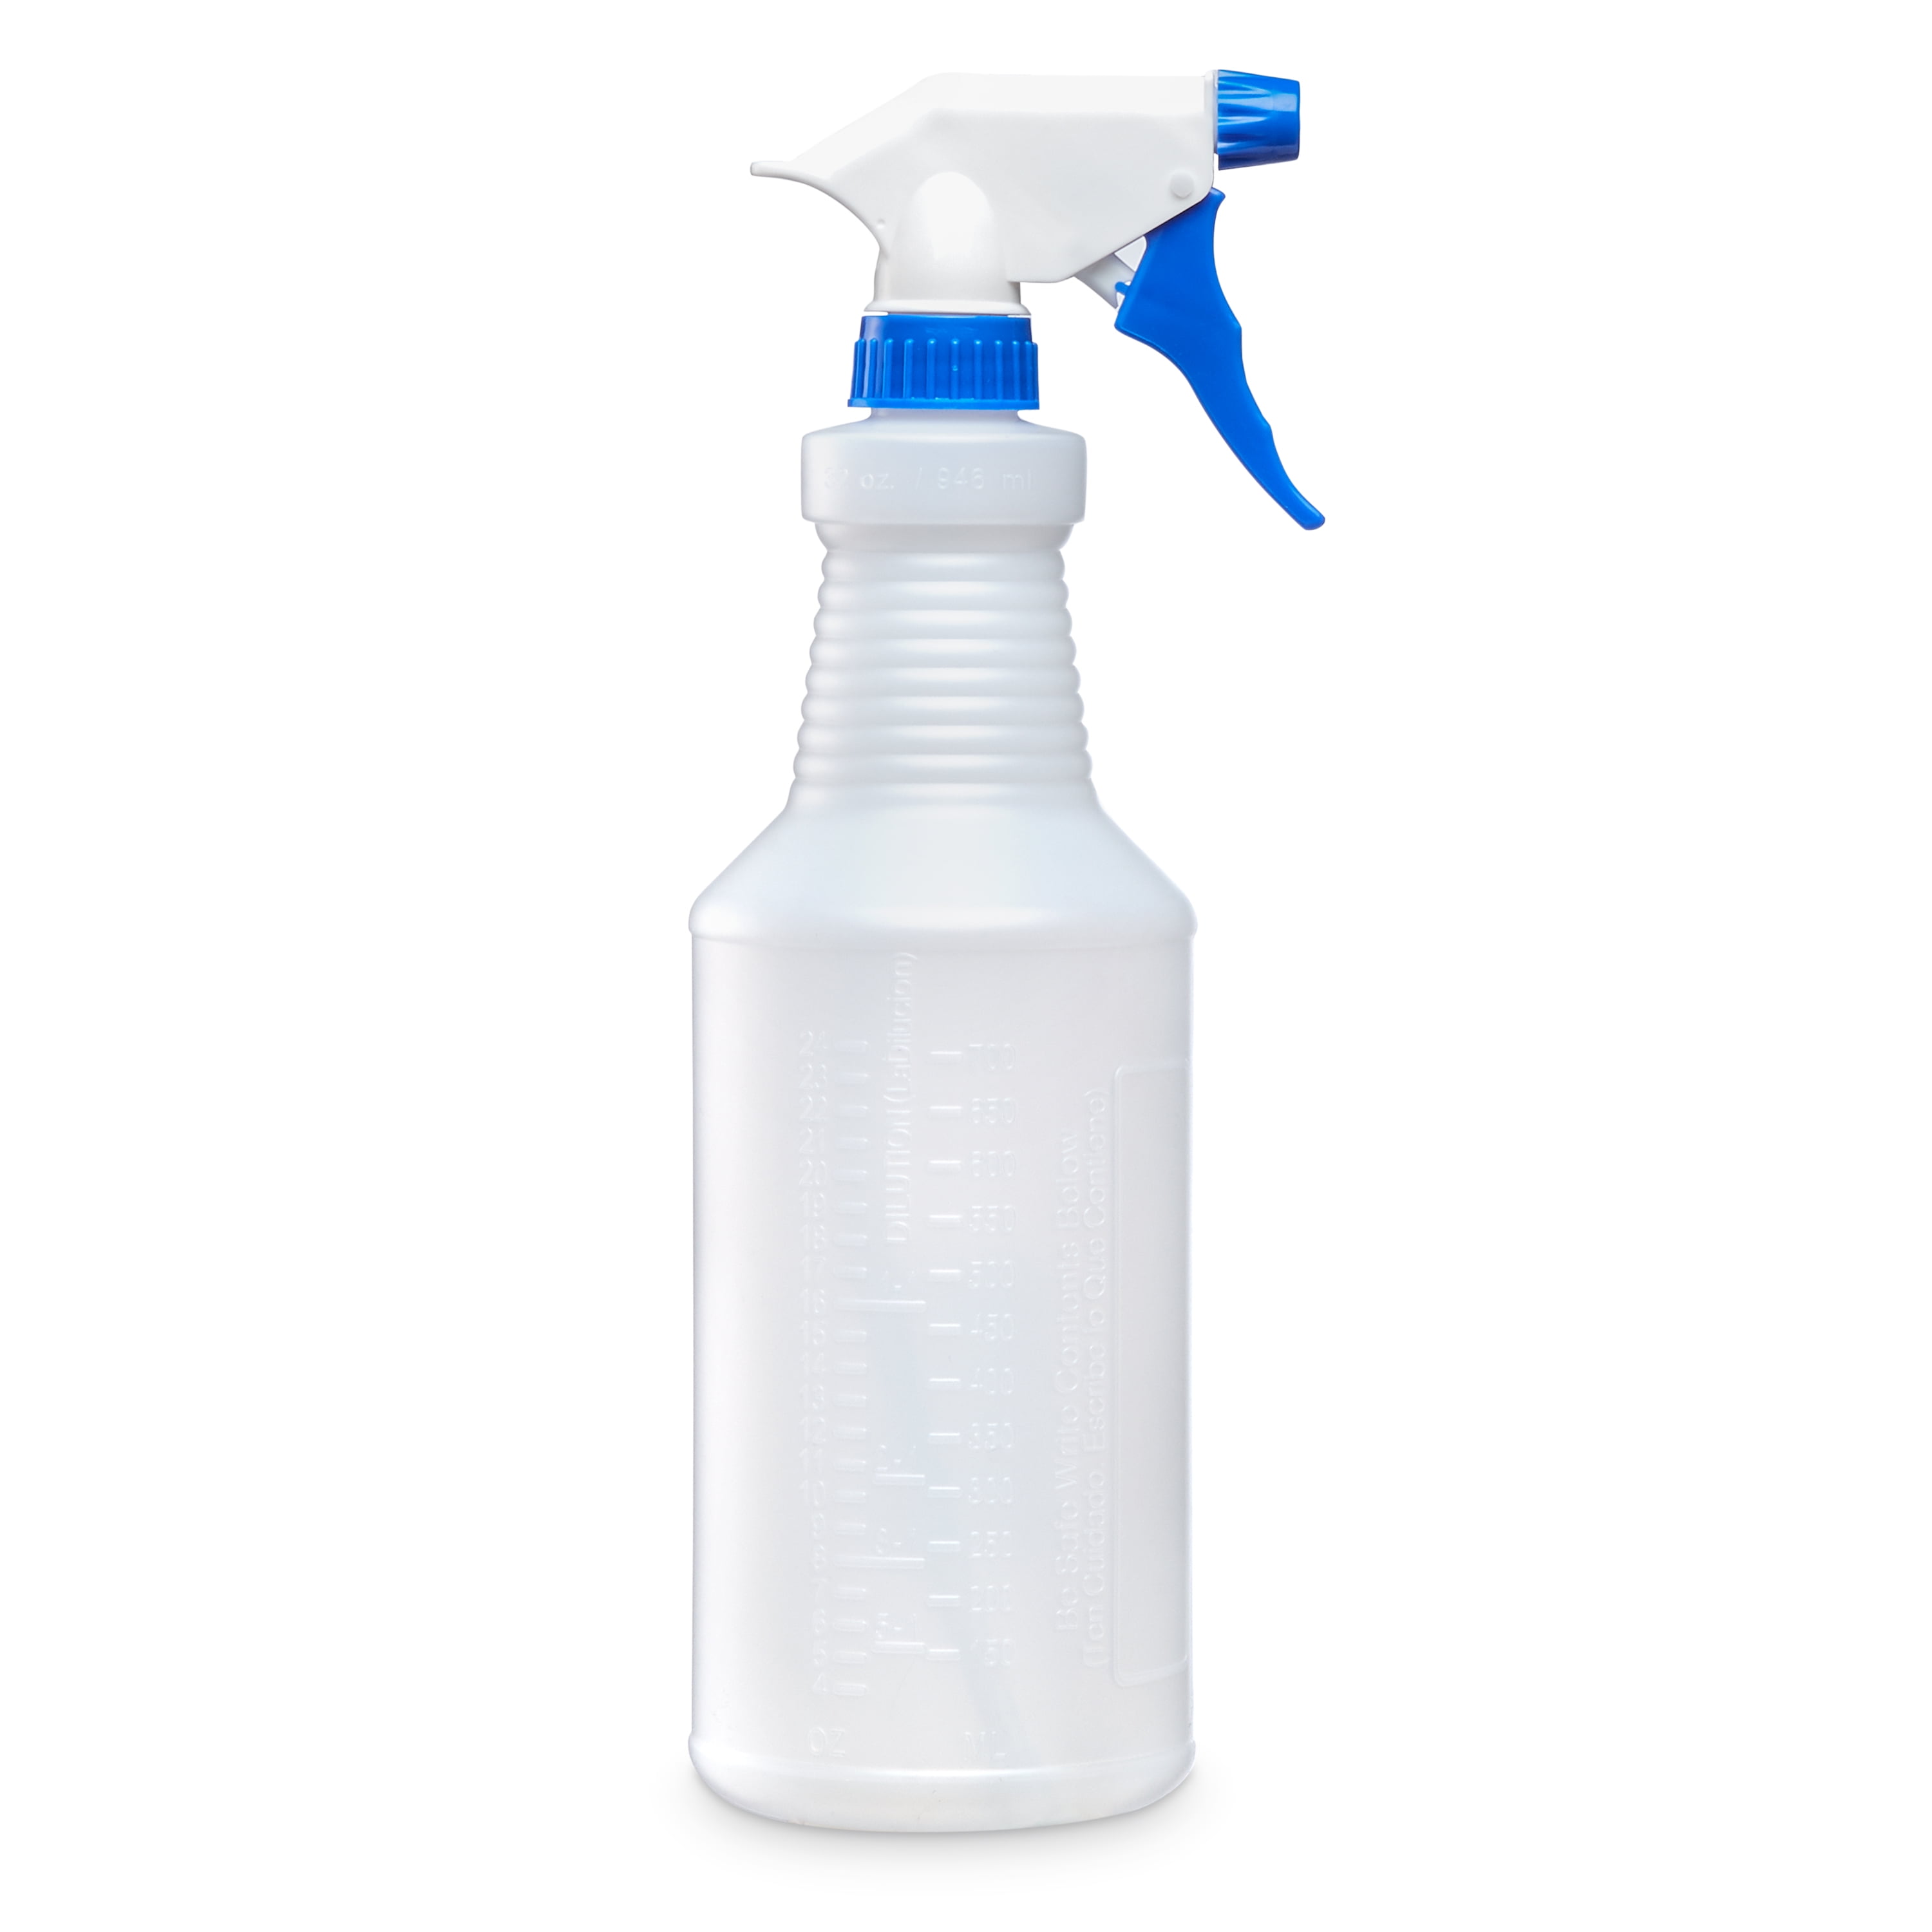 32 Ounce Plastic Spray Bottle Used to Clean Quik Stage Polyvinyl Stage Deck  Surfaces.